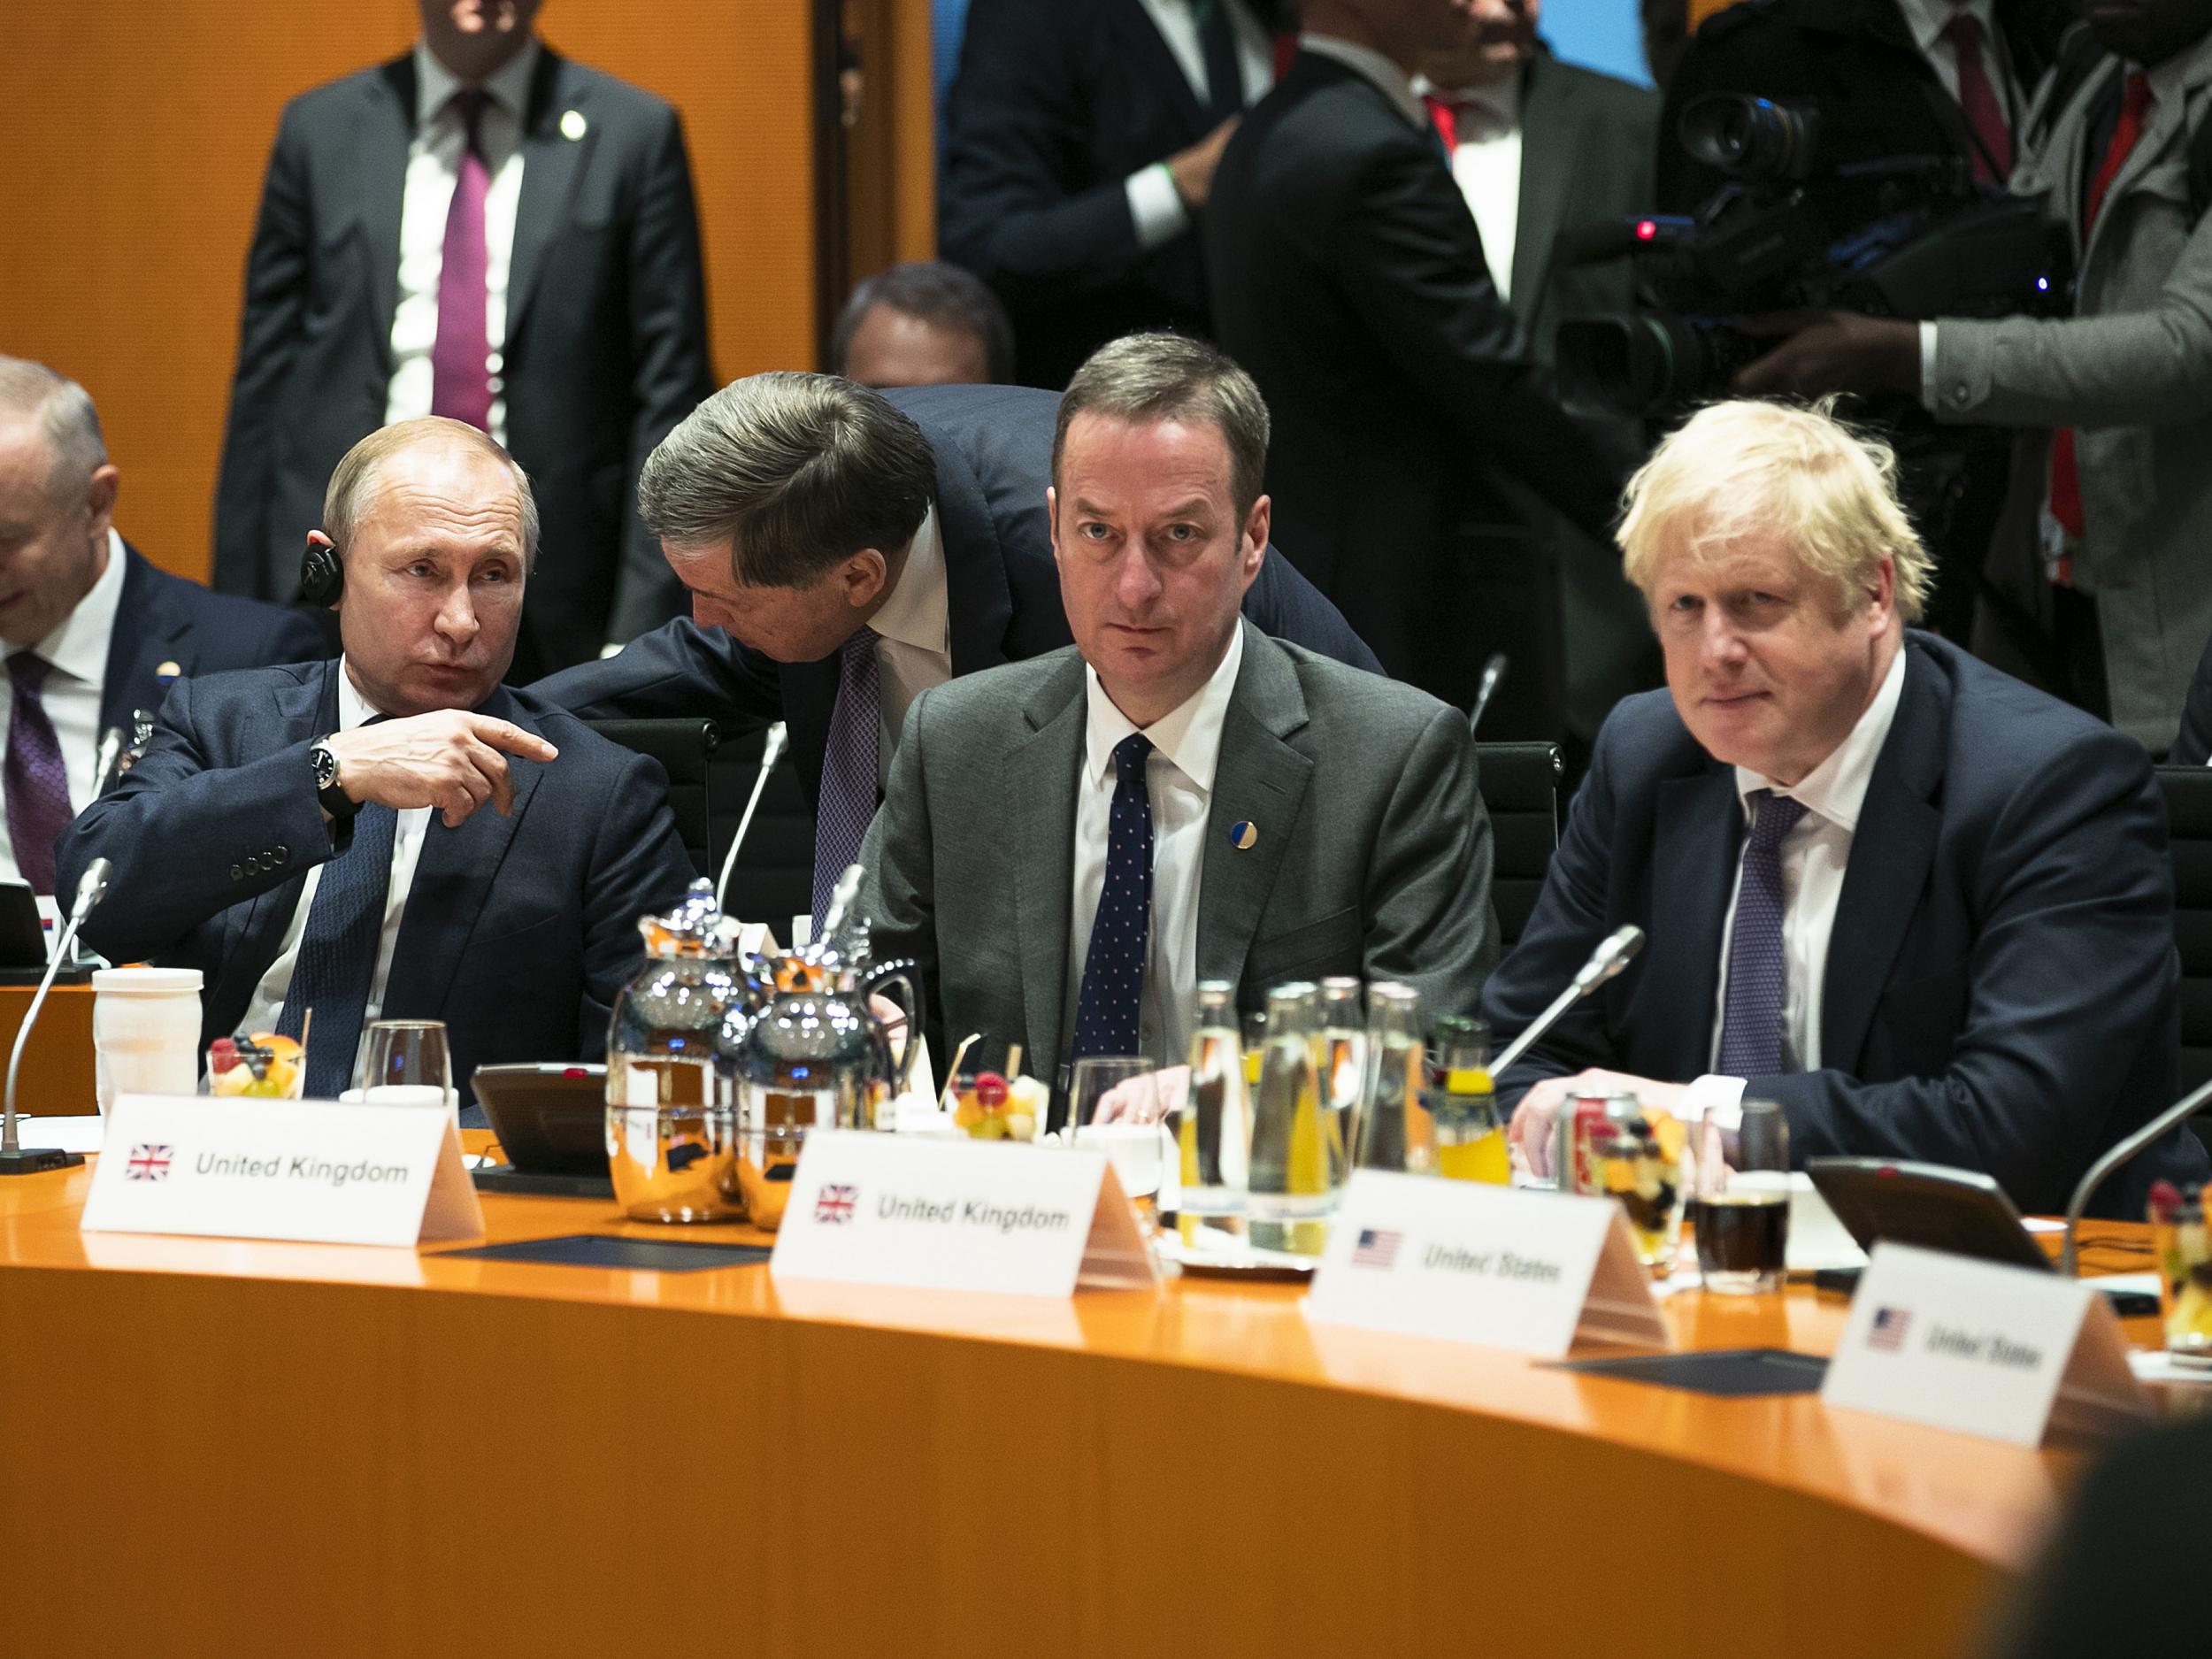 Boris Johnson tells Putin there will be no normalisation of UK-Russia relationship until 'destabilising activity' ends